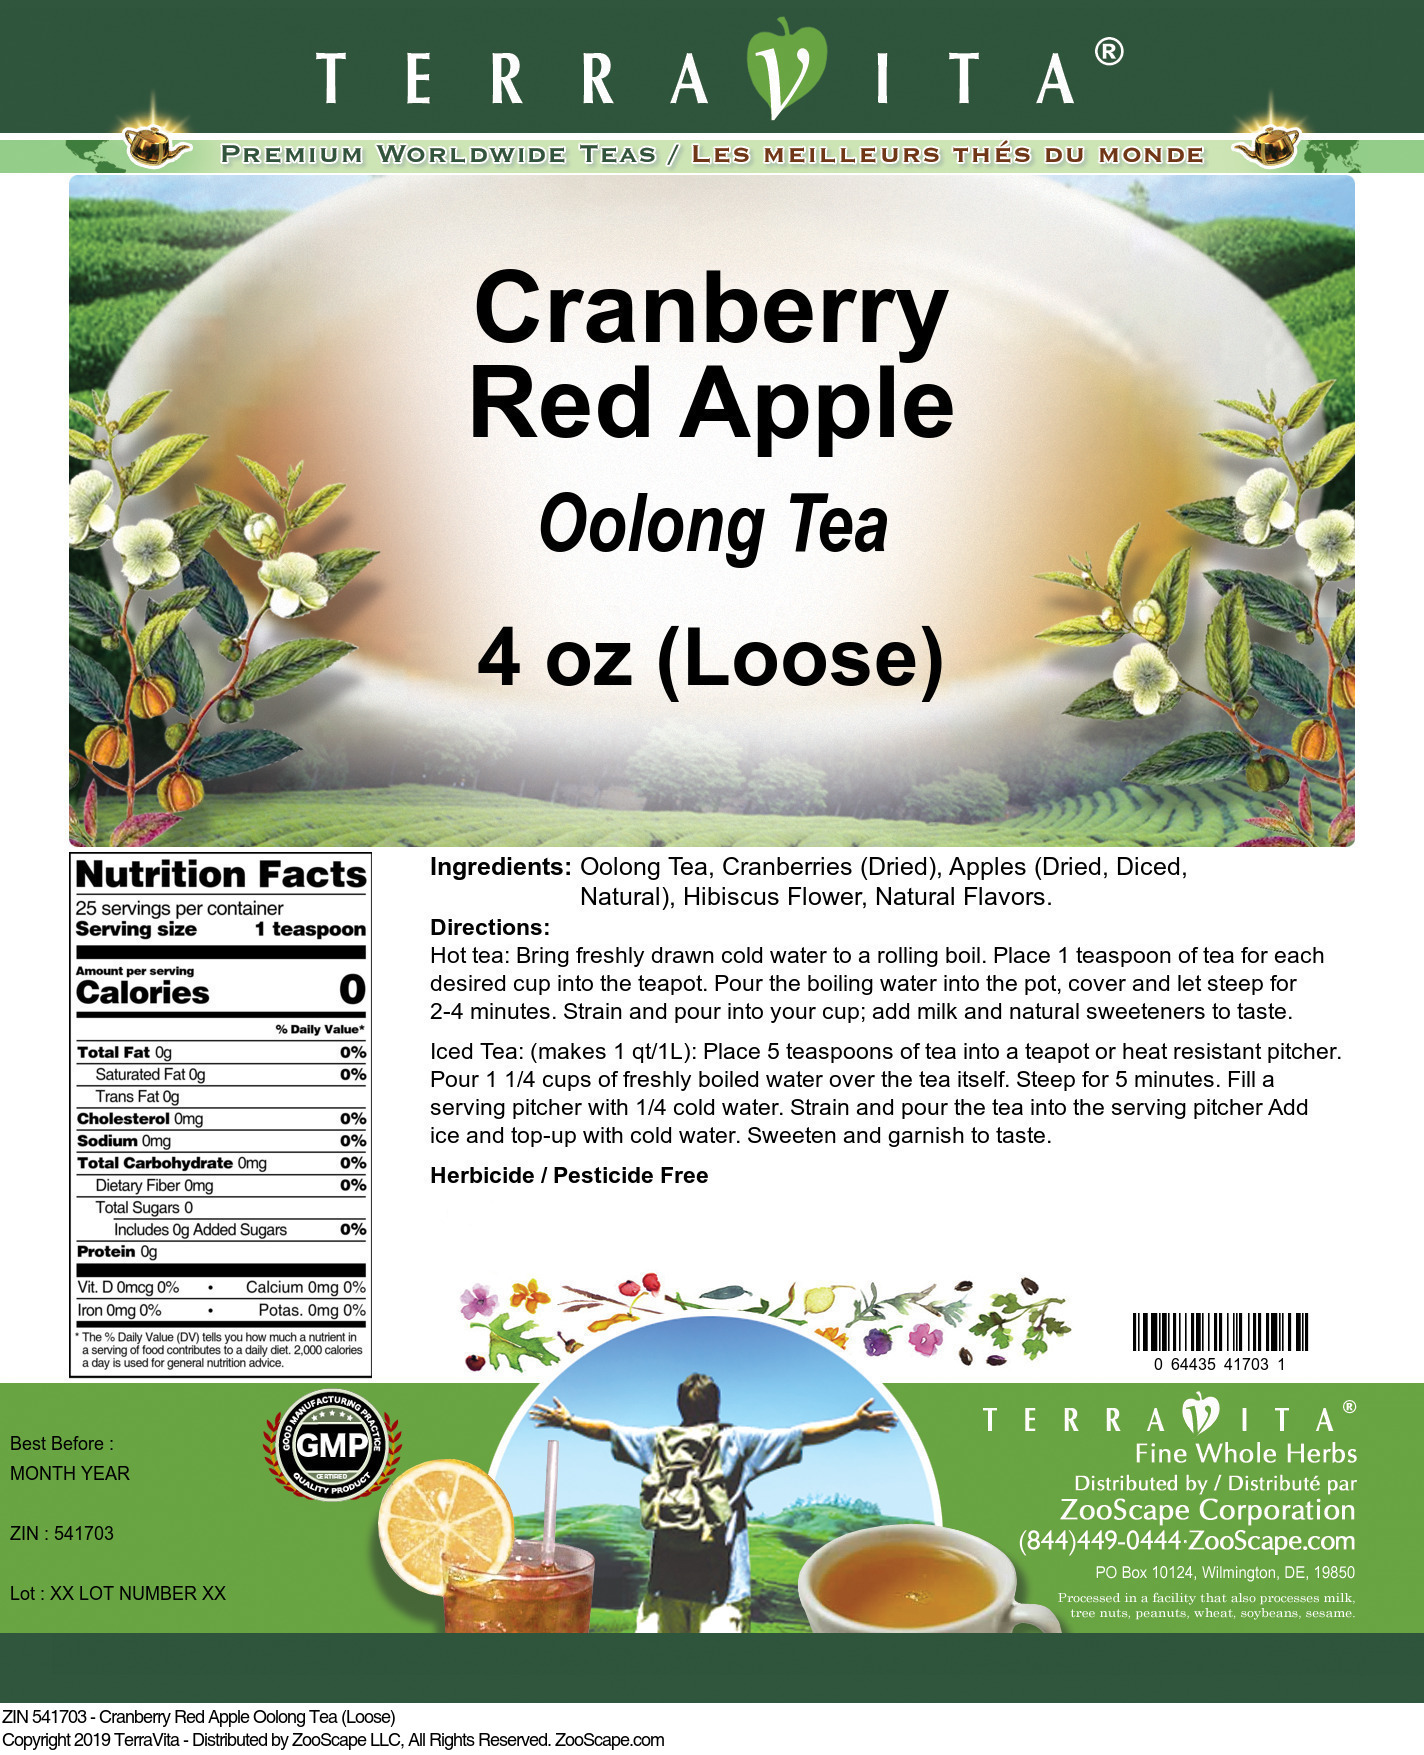 Cranberry Red Apple Oolong Tea (Loose) - Label